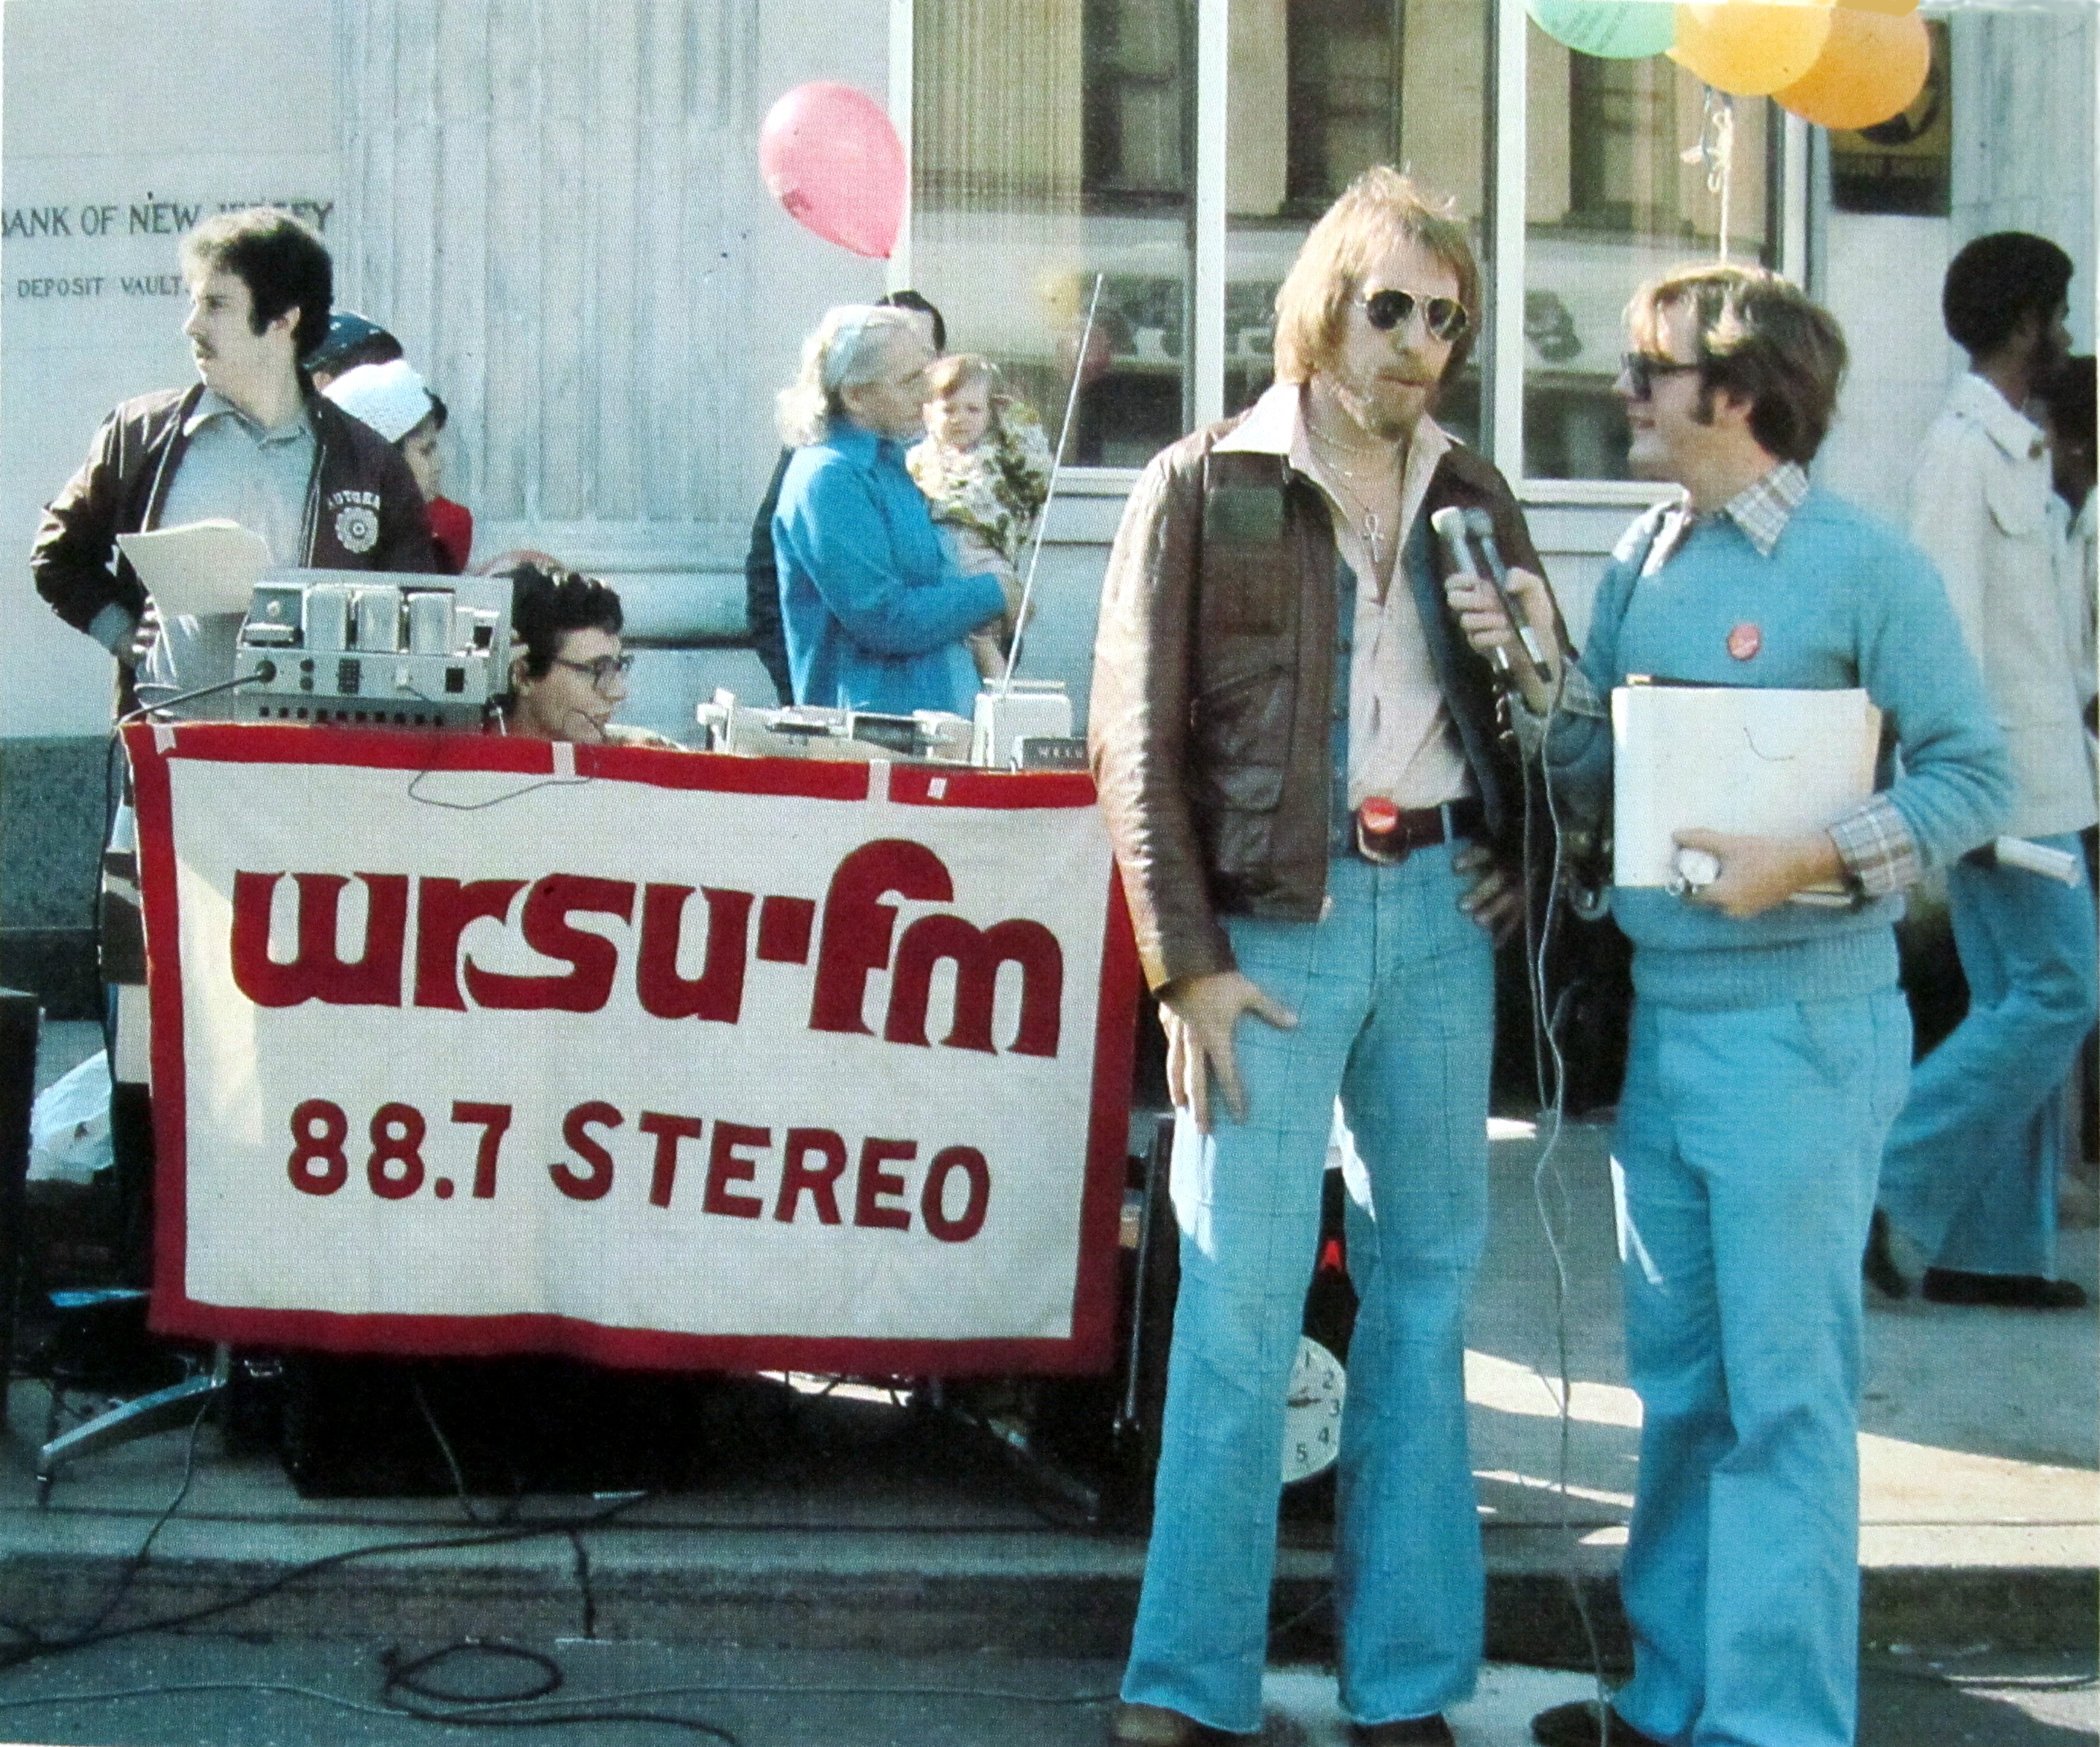 1978 - Live From George Street. Left: Jay Duhl, Dan Schleck on the board, Mike Blishak doing the interview. Our Felt Banner.